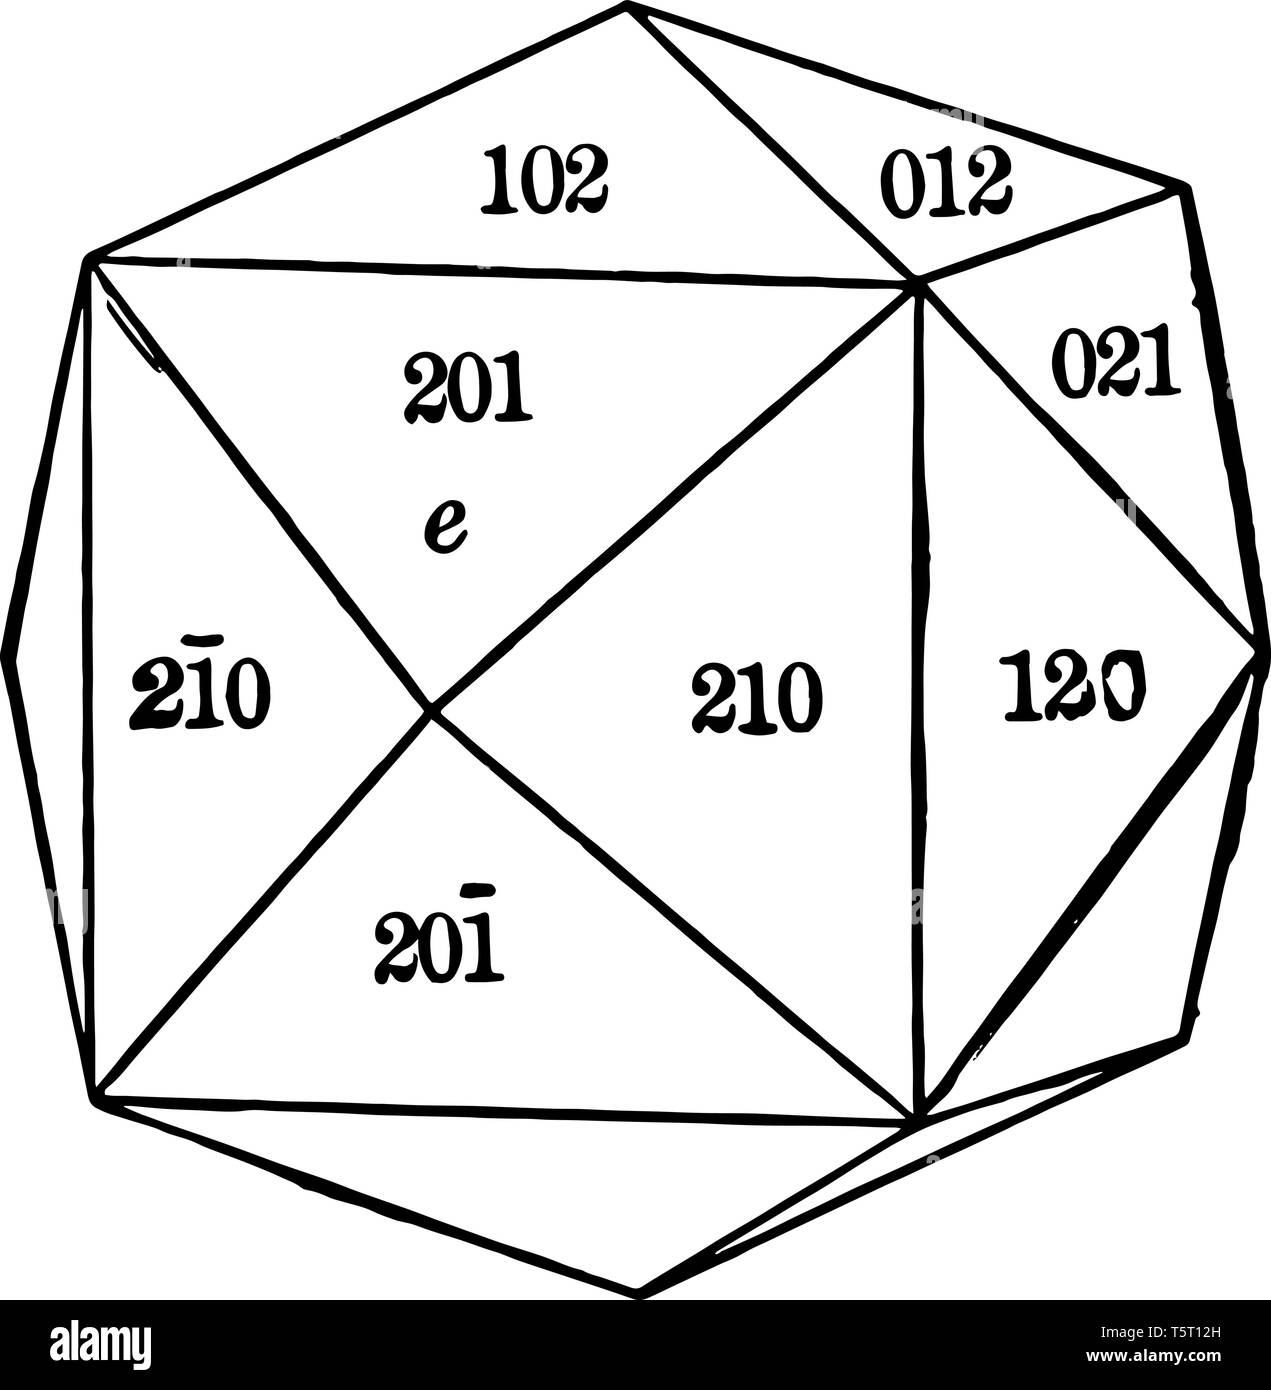 A diagram of Tetrahexahedron. It is a form composed of twenty-four isosceles triangular faces, each of which crosses an axis in the unit, the second i Stock Vector